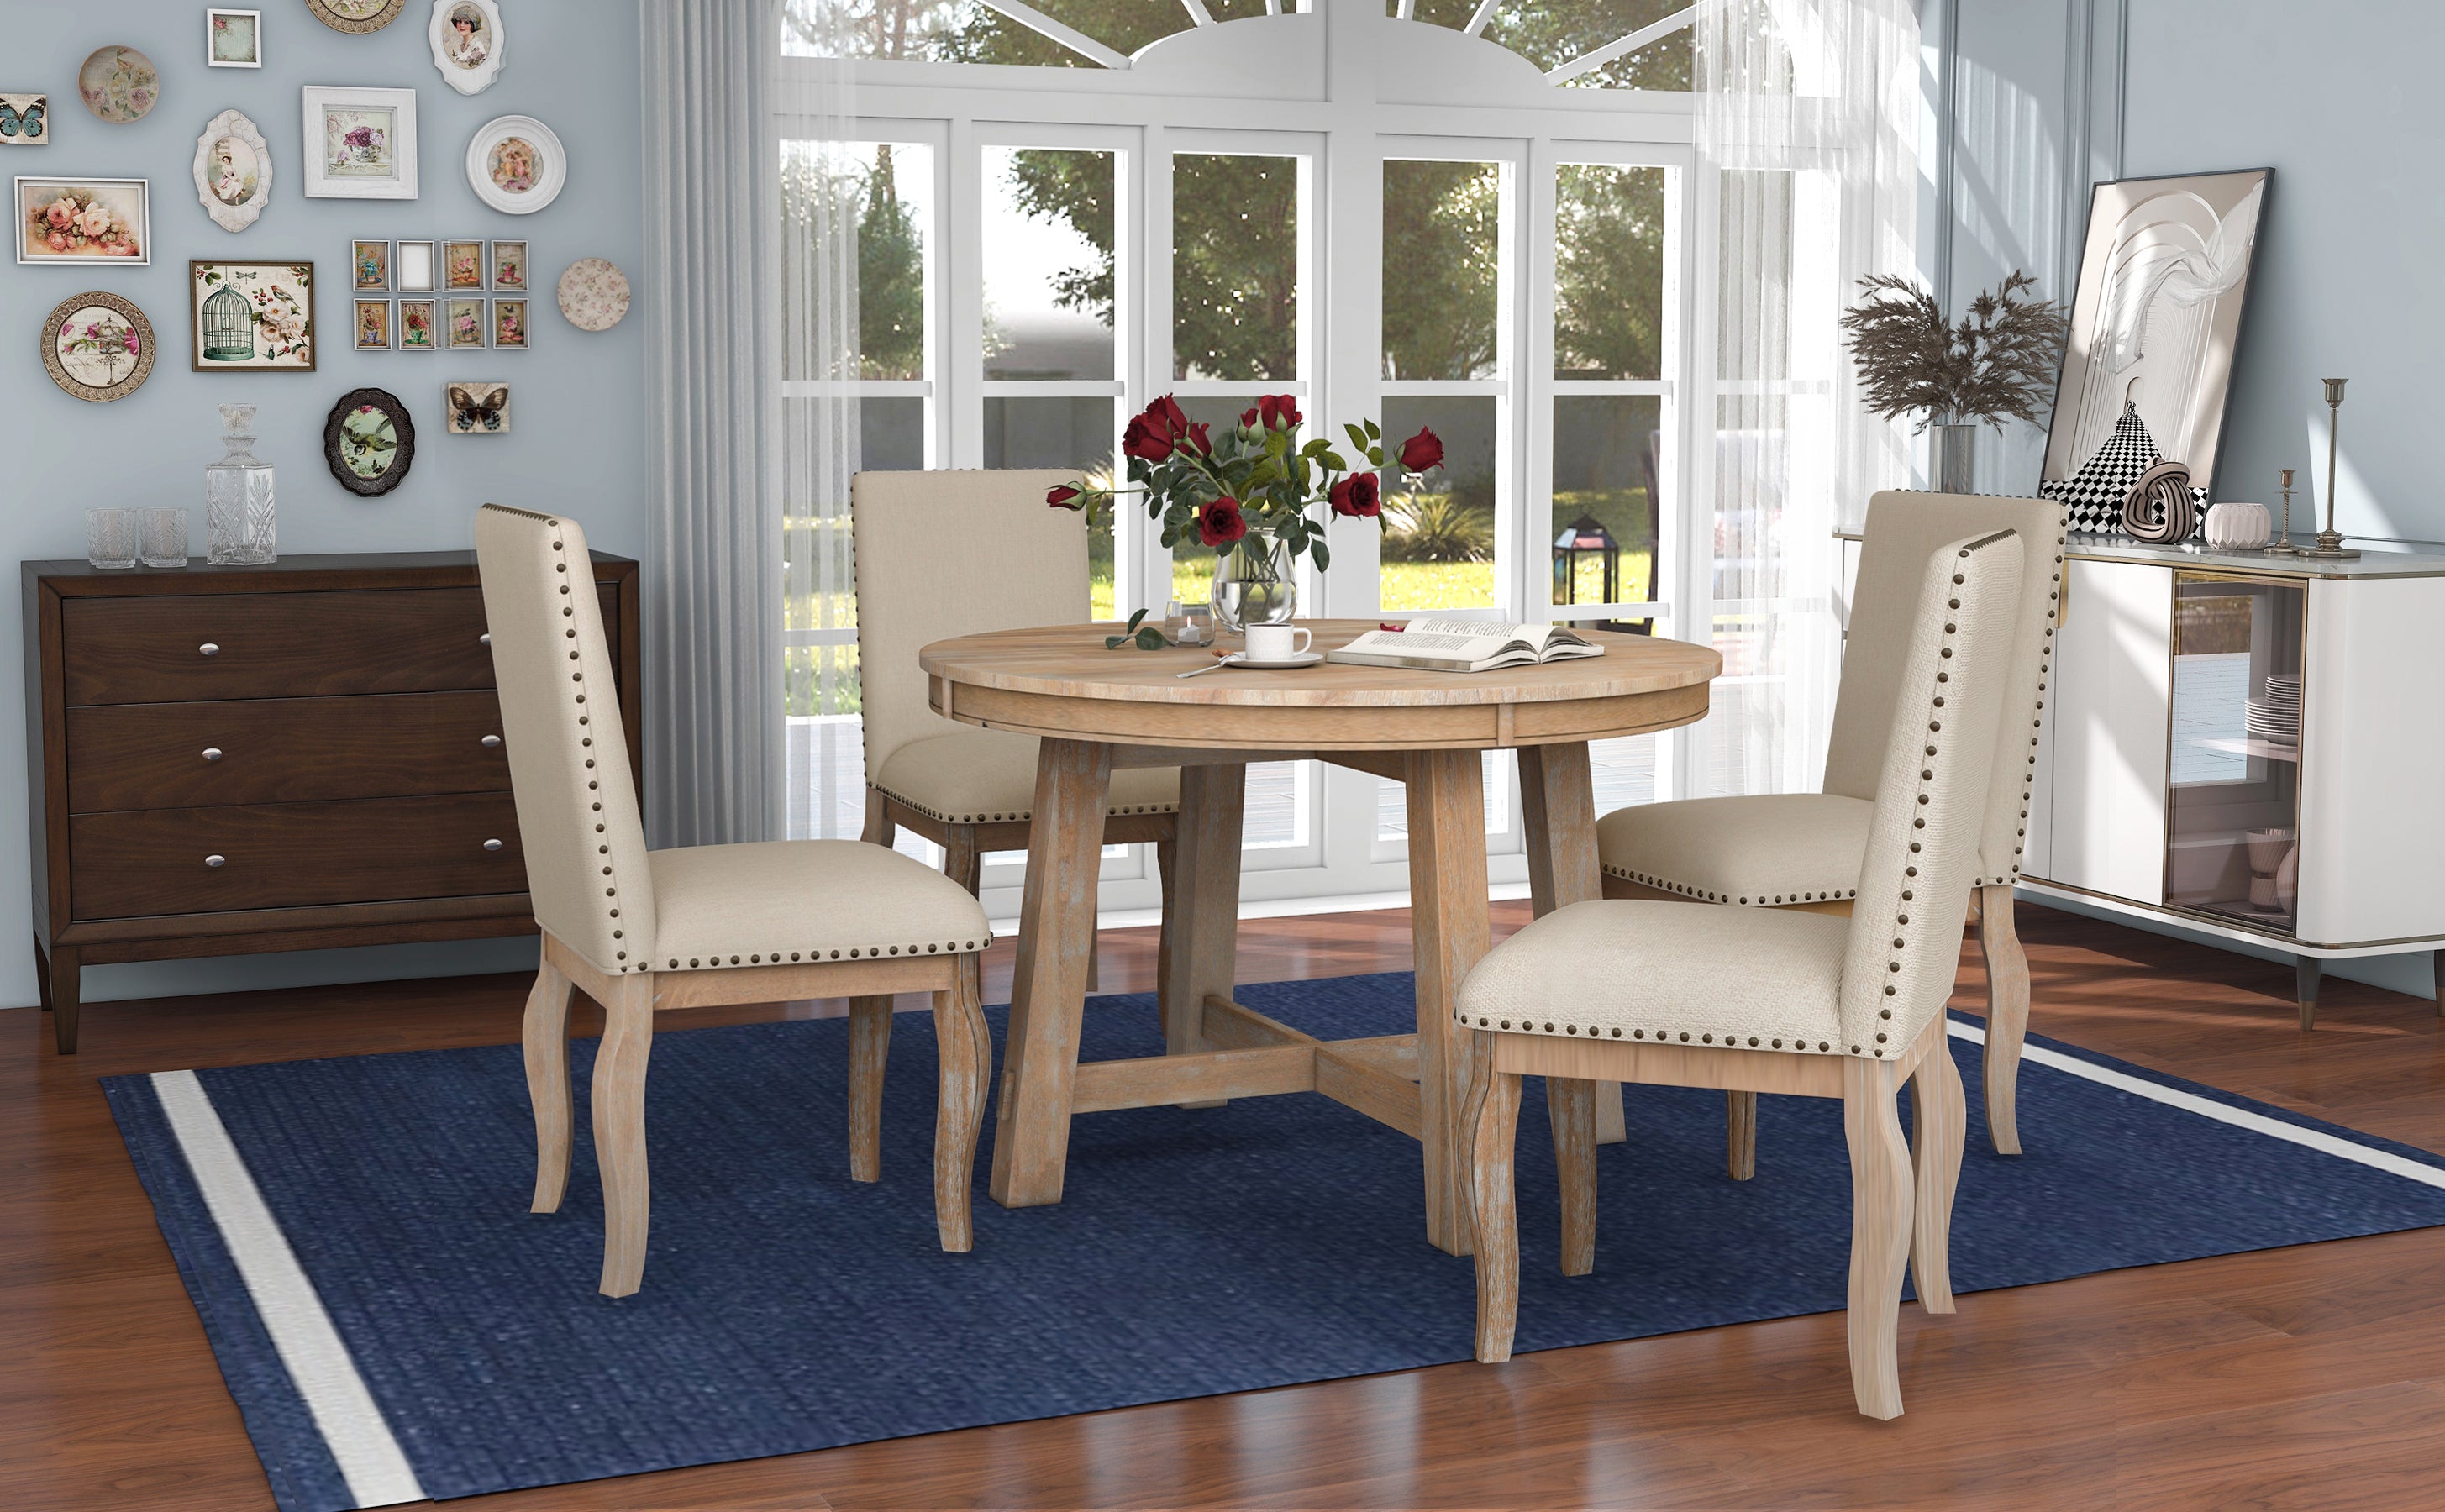 5-Piece Farmhouse Dining Table Set Wood Round Extendable Table and 4 Upholstered Chairs - Natural Wood Wash